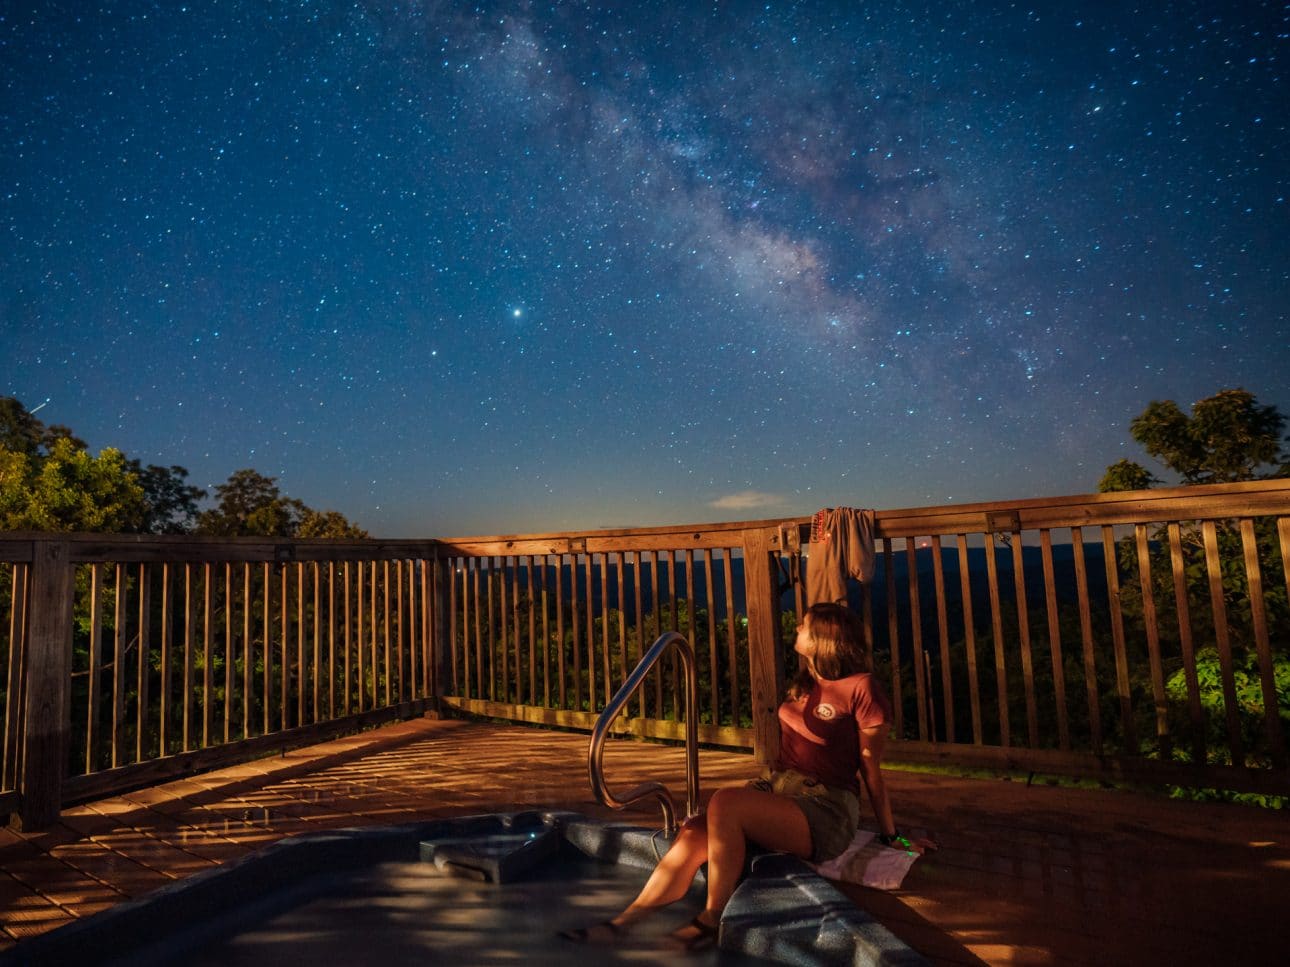 A girl views the Milky Way from the Riverwind Lodge hot-tub.